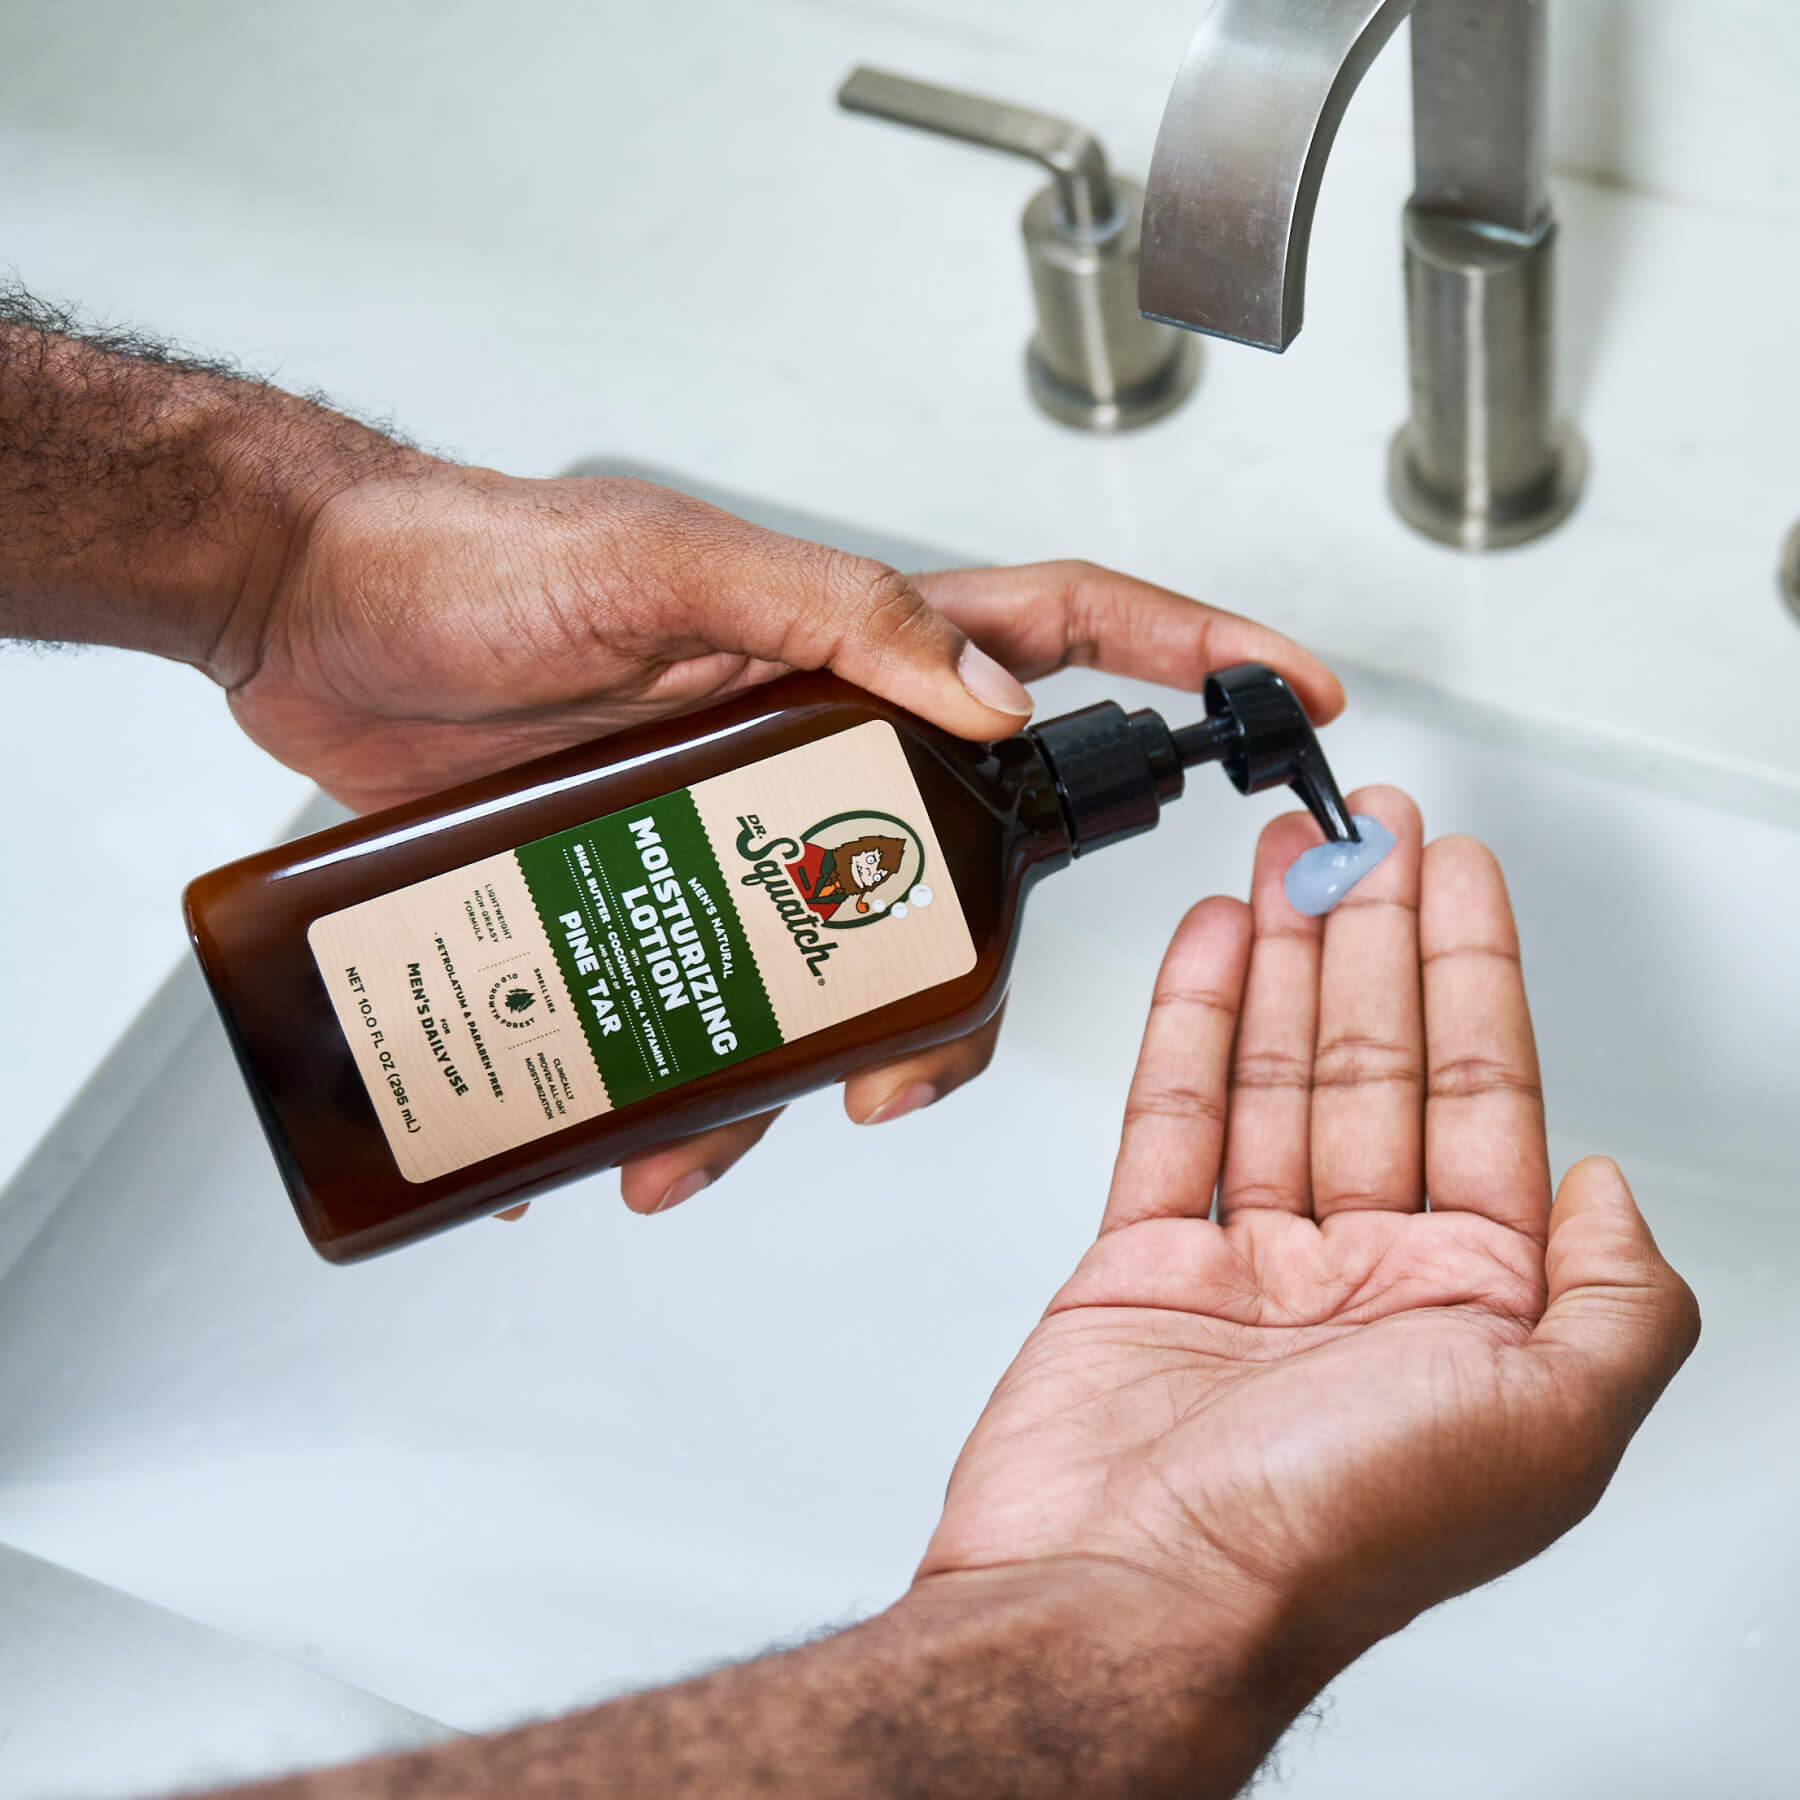 Dr. Squatch Men's Natural Lotion Non-Greasy - 24-hour moisturization hand  and body lotion - Made with Shea Butter, Coconut Oil, Vitamin E, & Menthyl